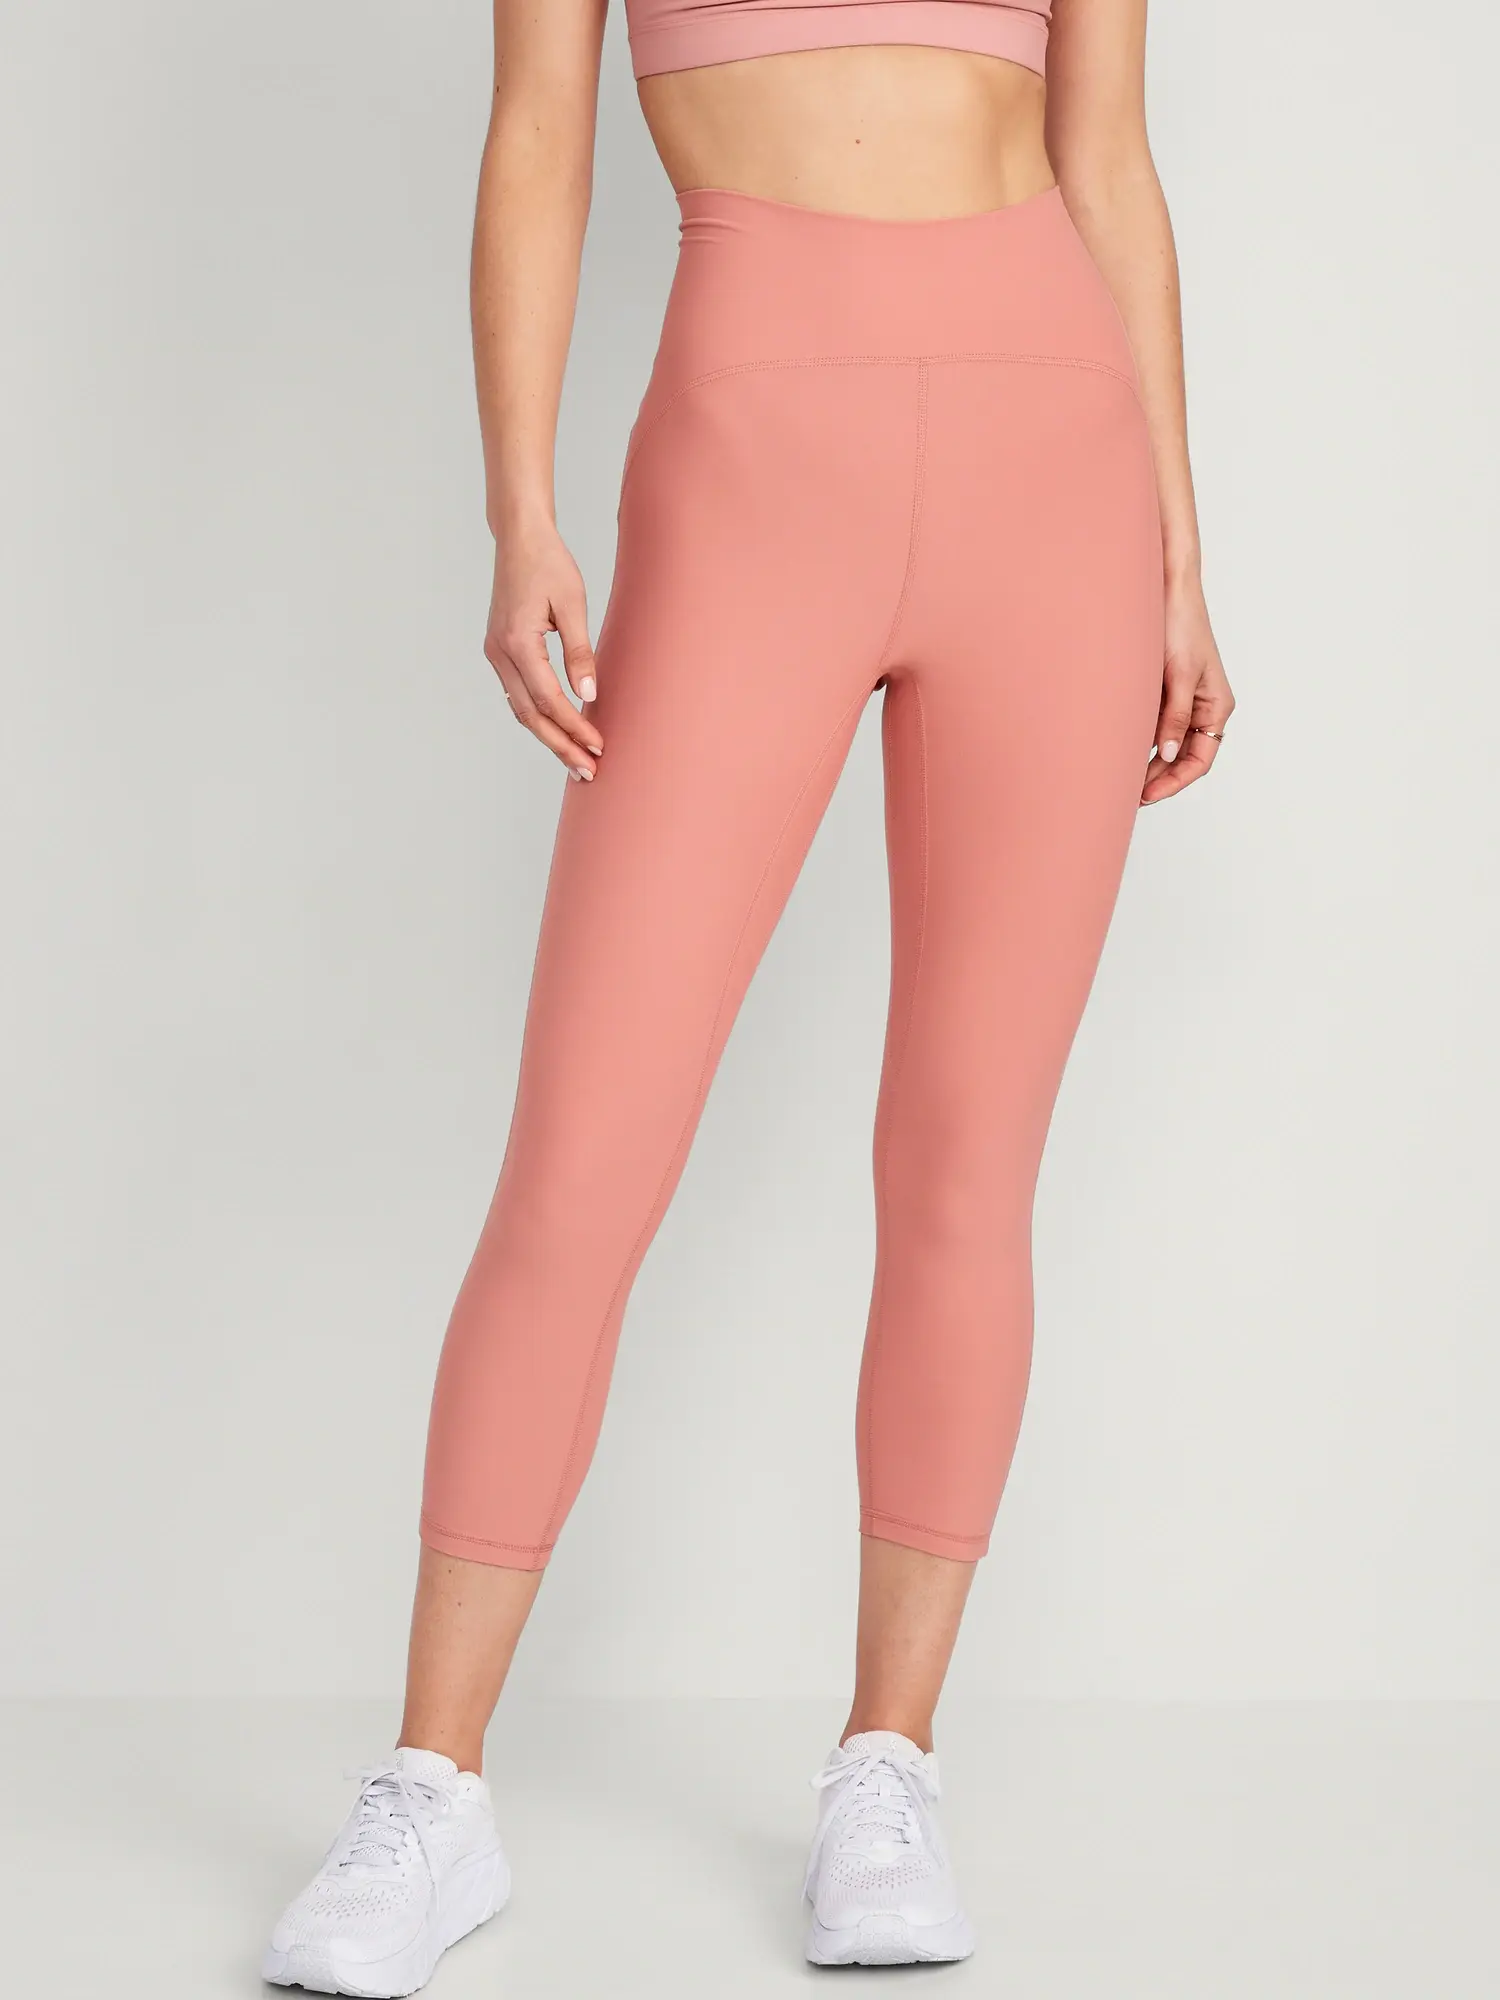 Old Navy Extra High-Waisted PowerLite Lycra® ADAPTIV Cropped Leggings for Women pink. 1